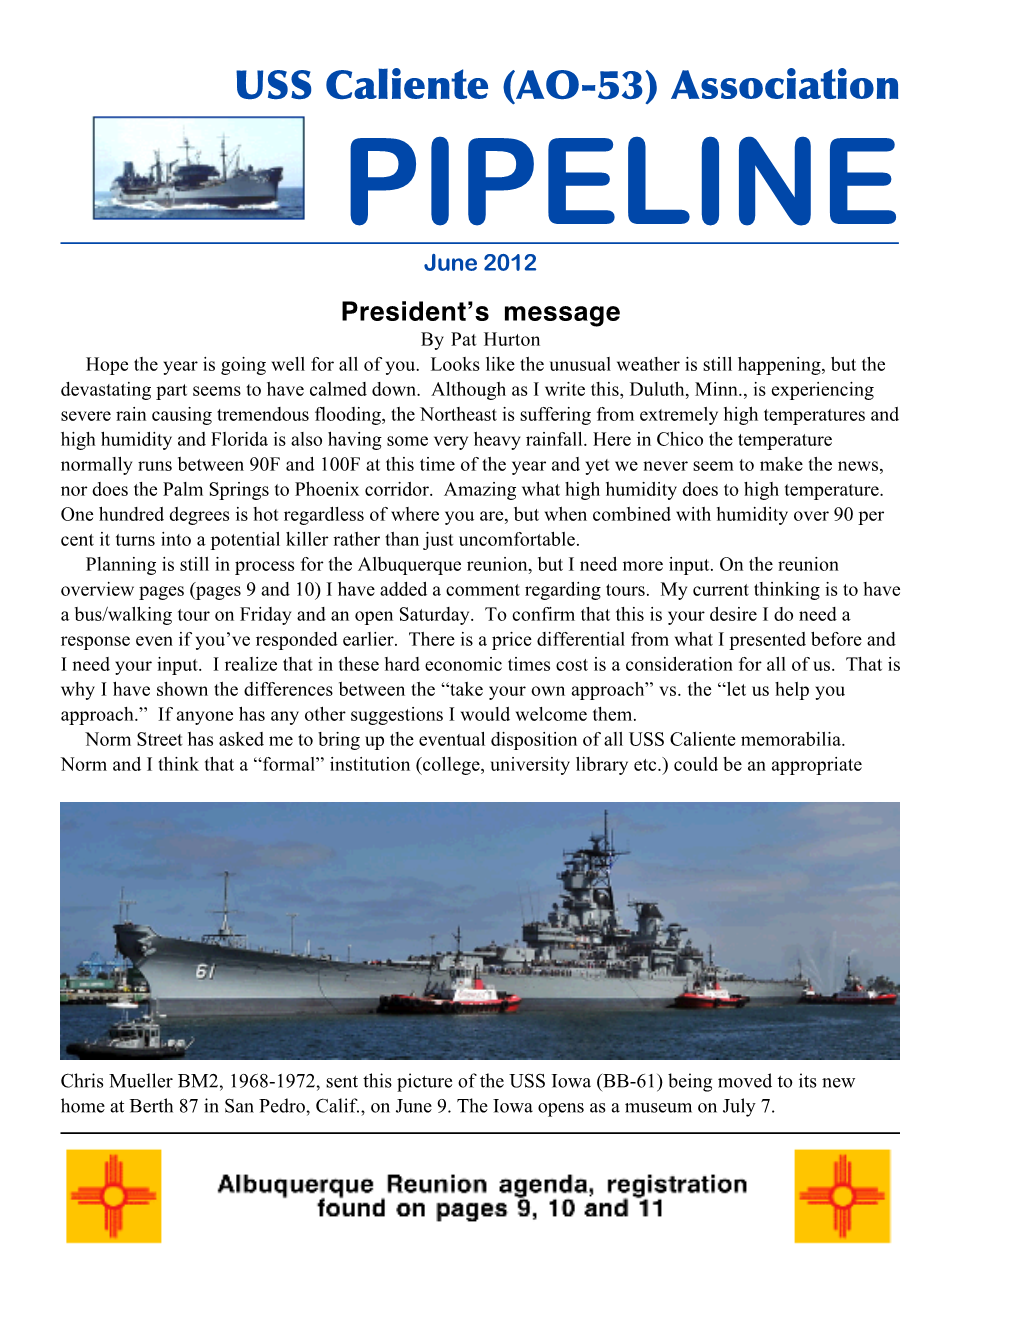 USS Caliente (AO-53) Association PIPELINE June 2012 President’S Message by Pat Hurton Hope the Year Is Going Well for All of You